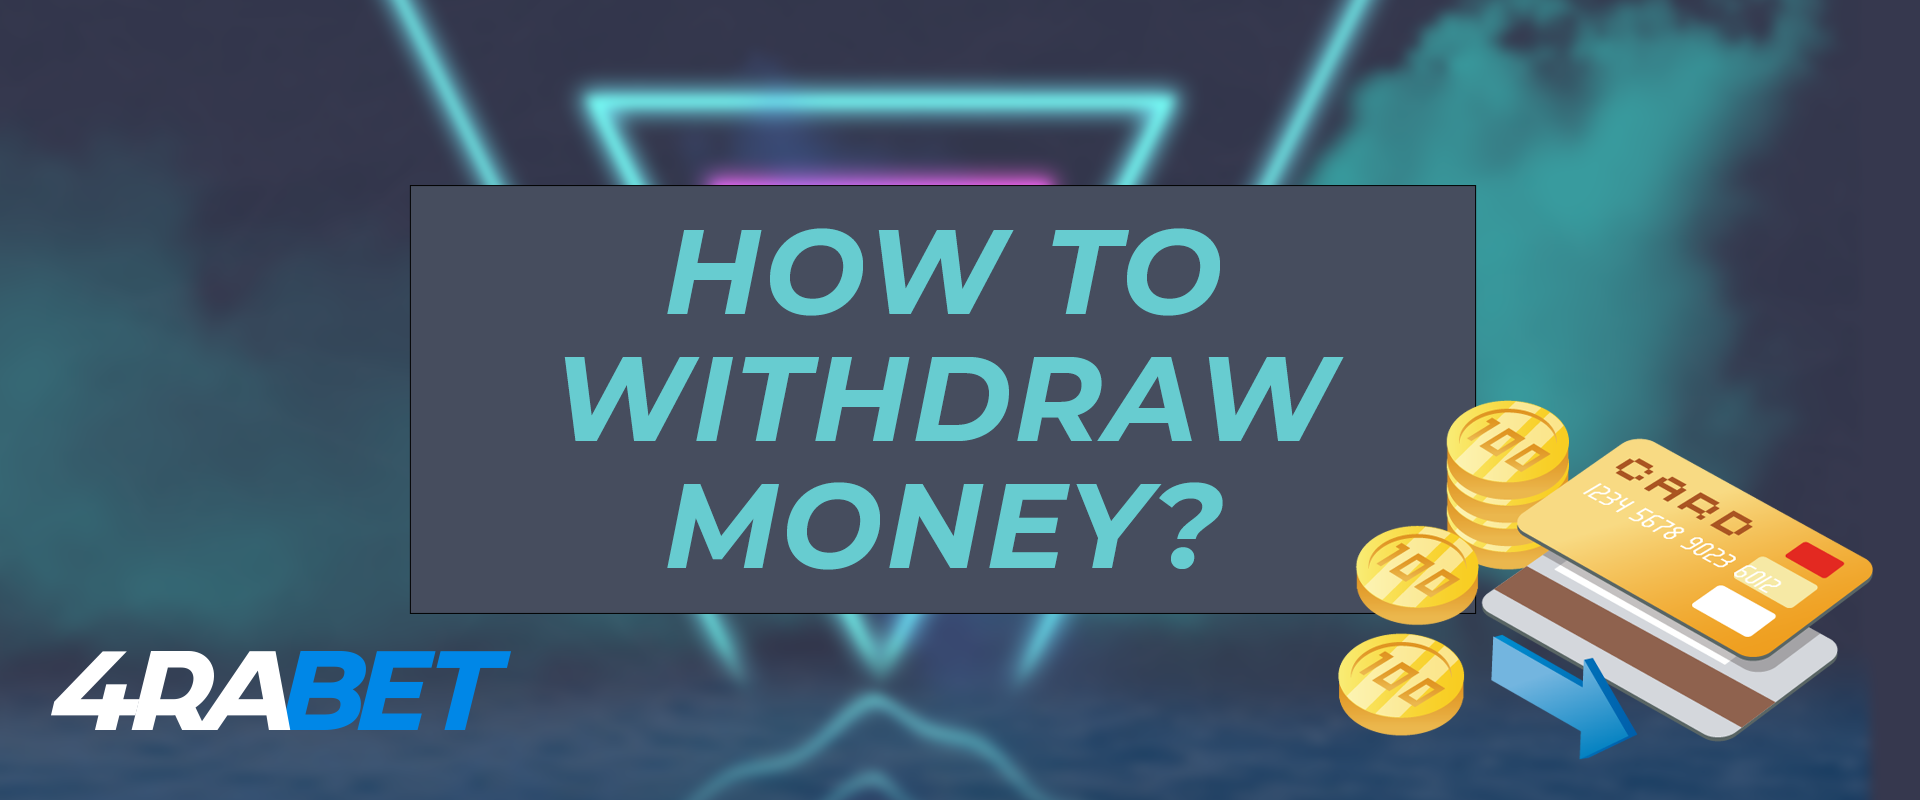 How to withdraw money from the 4rabet.